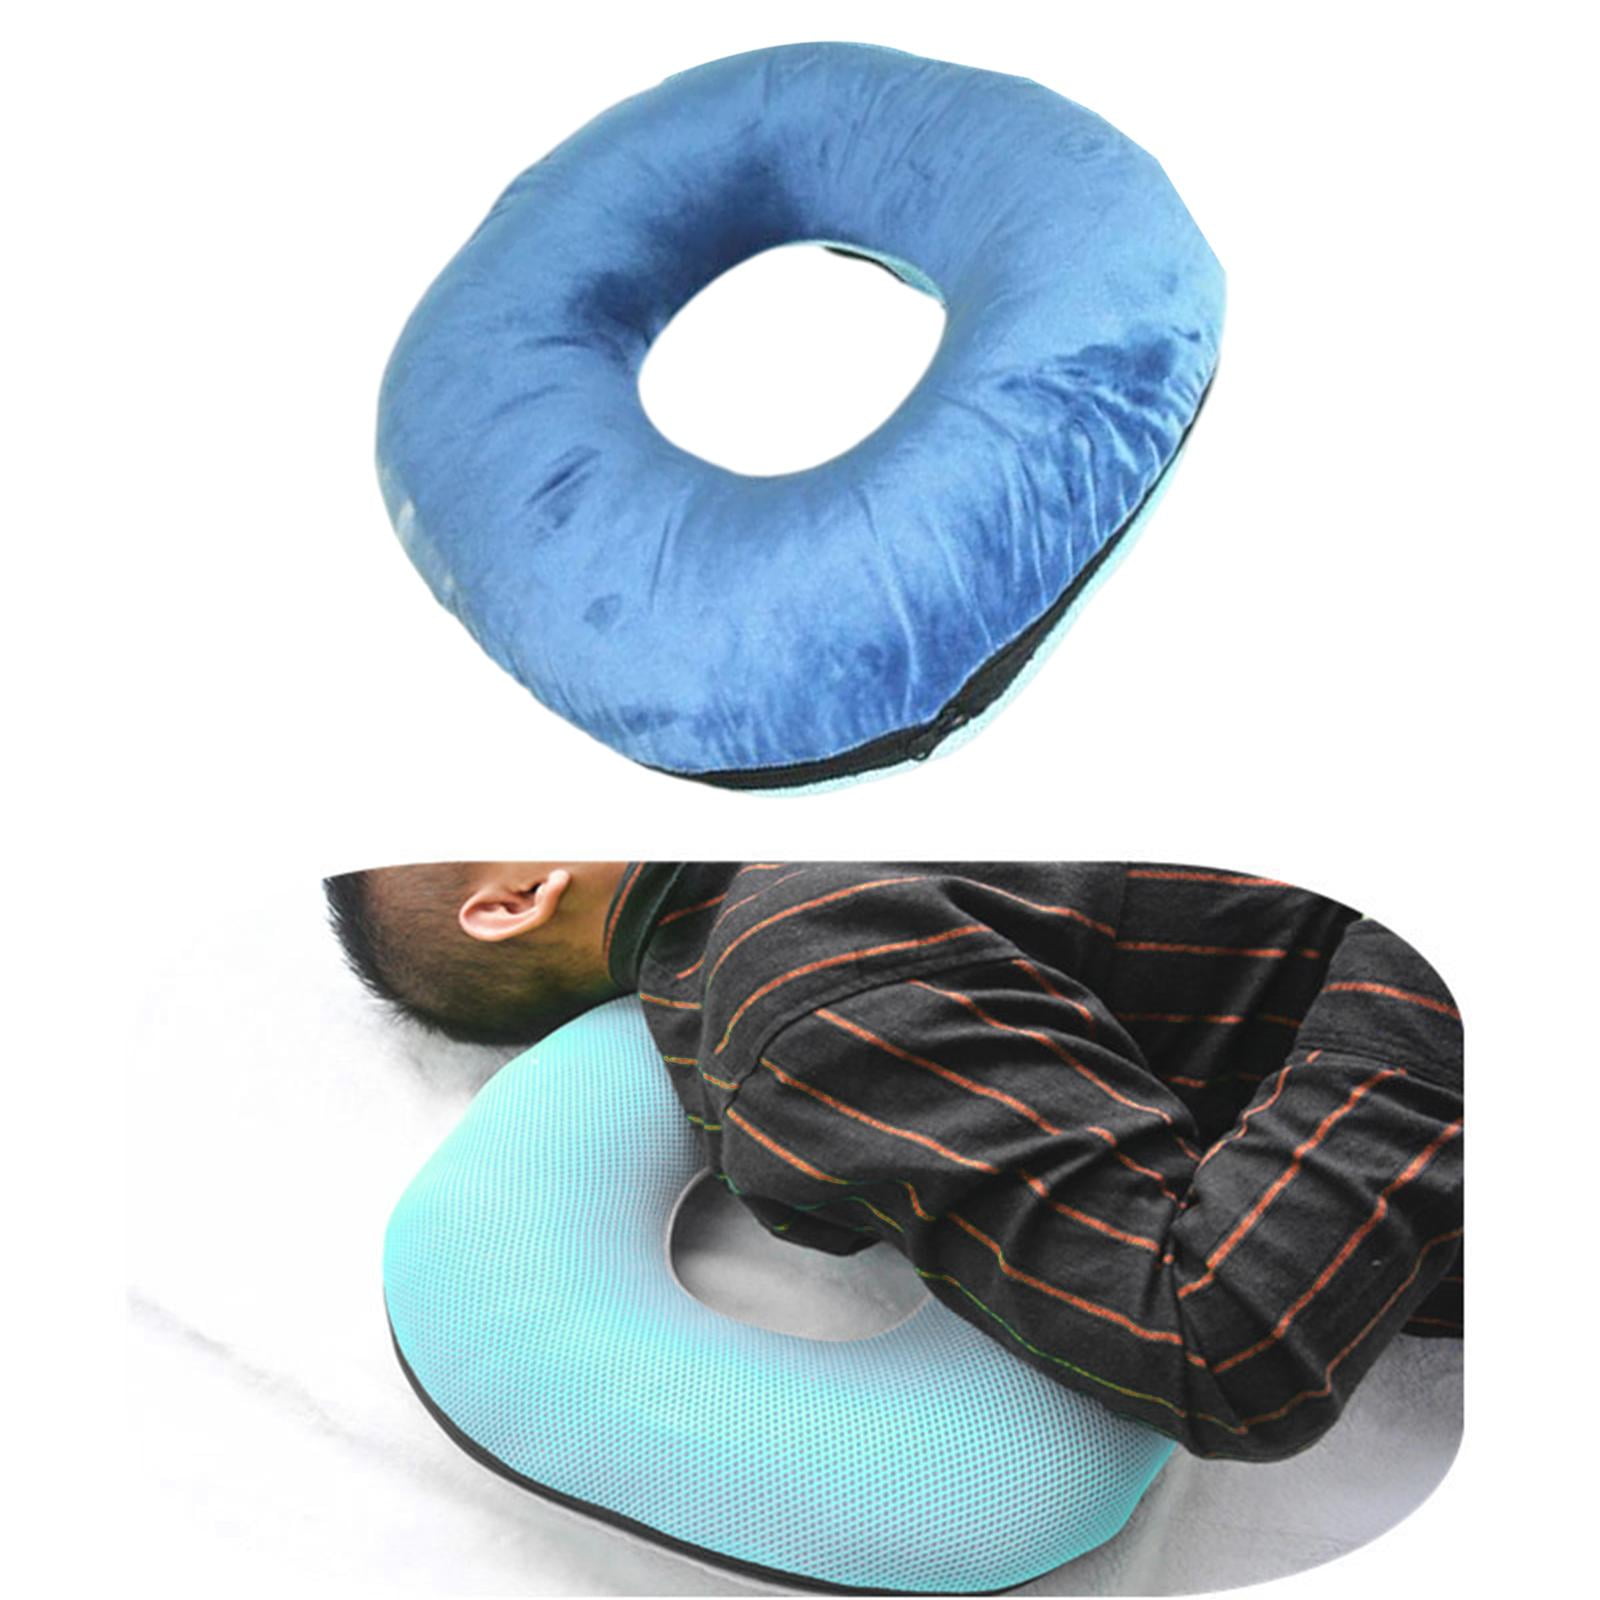 ccXrC Seat Cushion Donut Pillow and Chair Pillow for Tailbone Pain Relief,  Hemorrhoids Prostate Pregnancy Post Natal Pressure Relief and Surgery